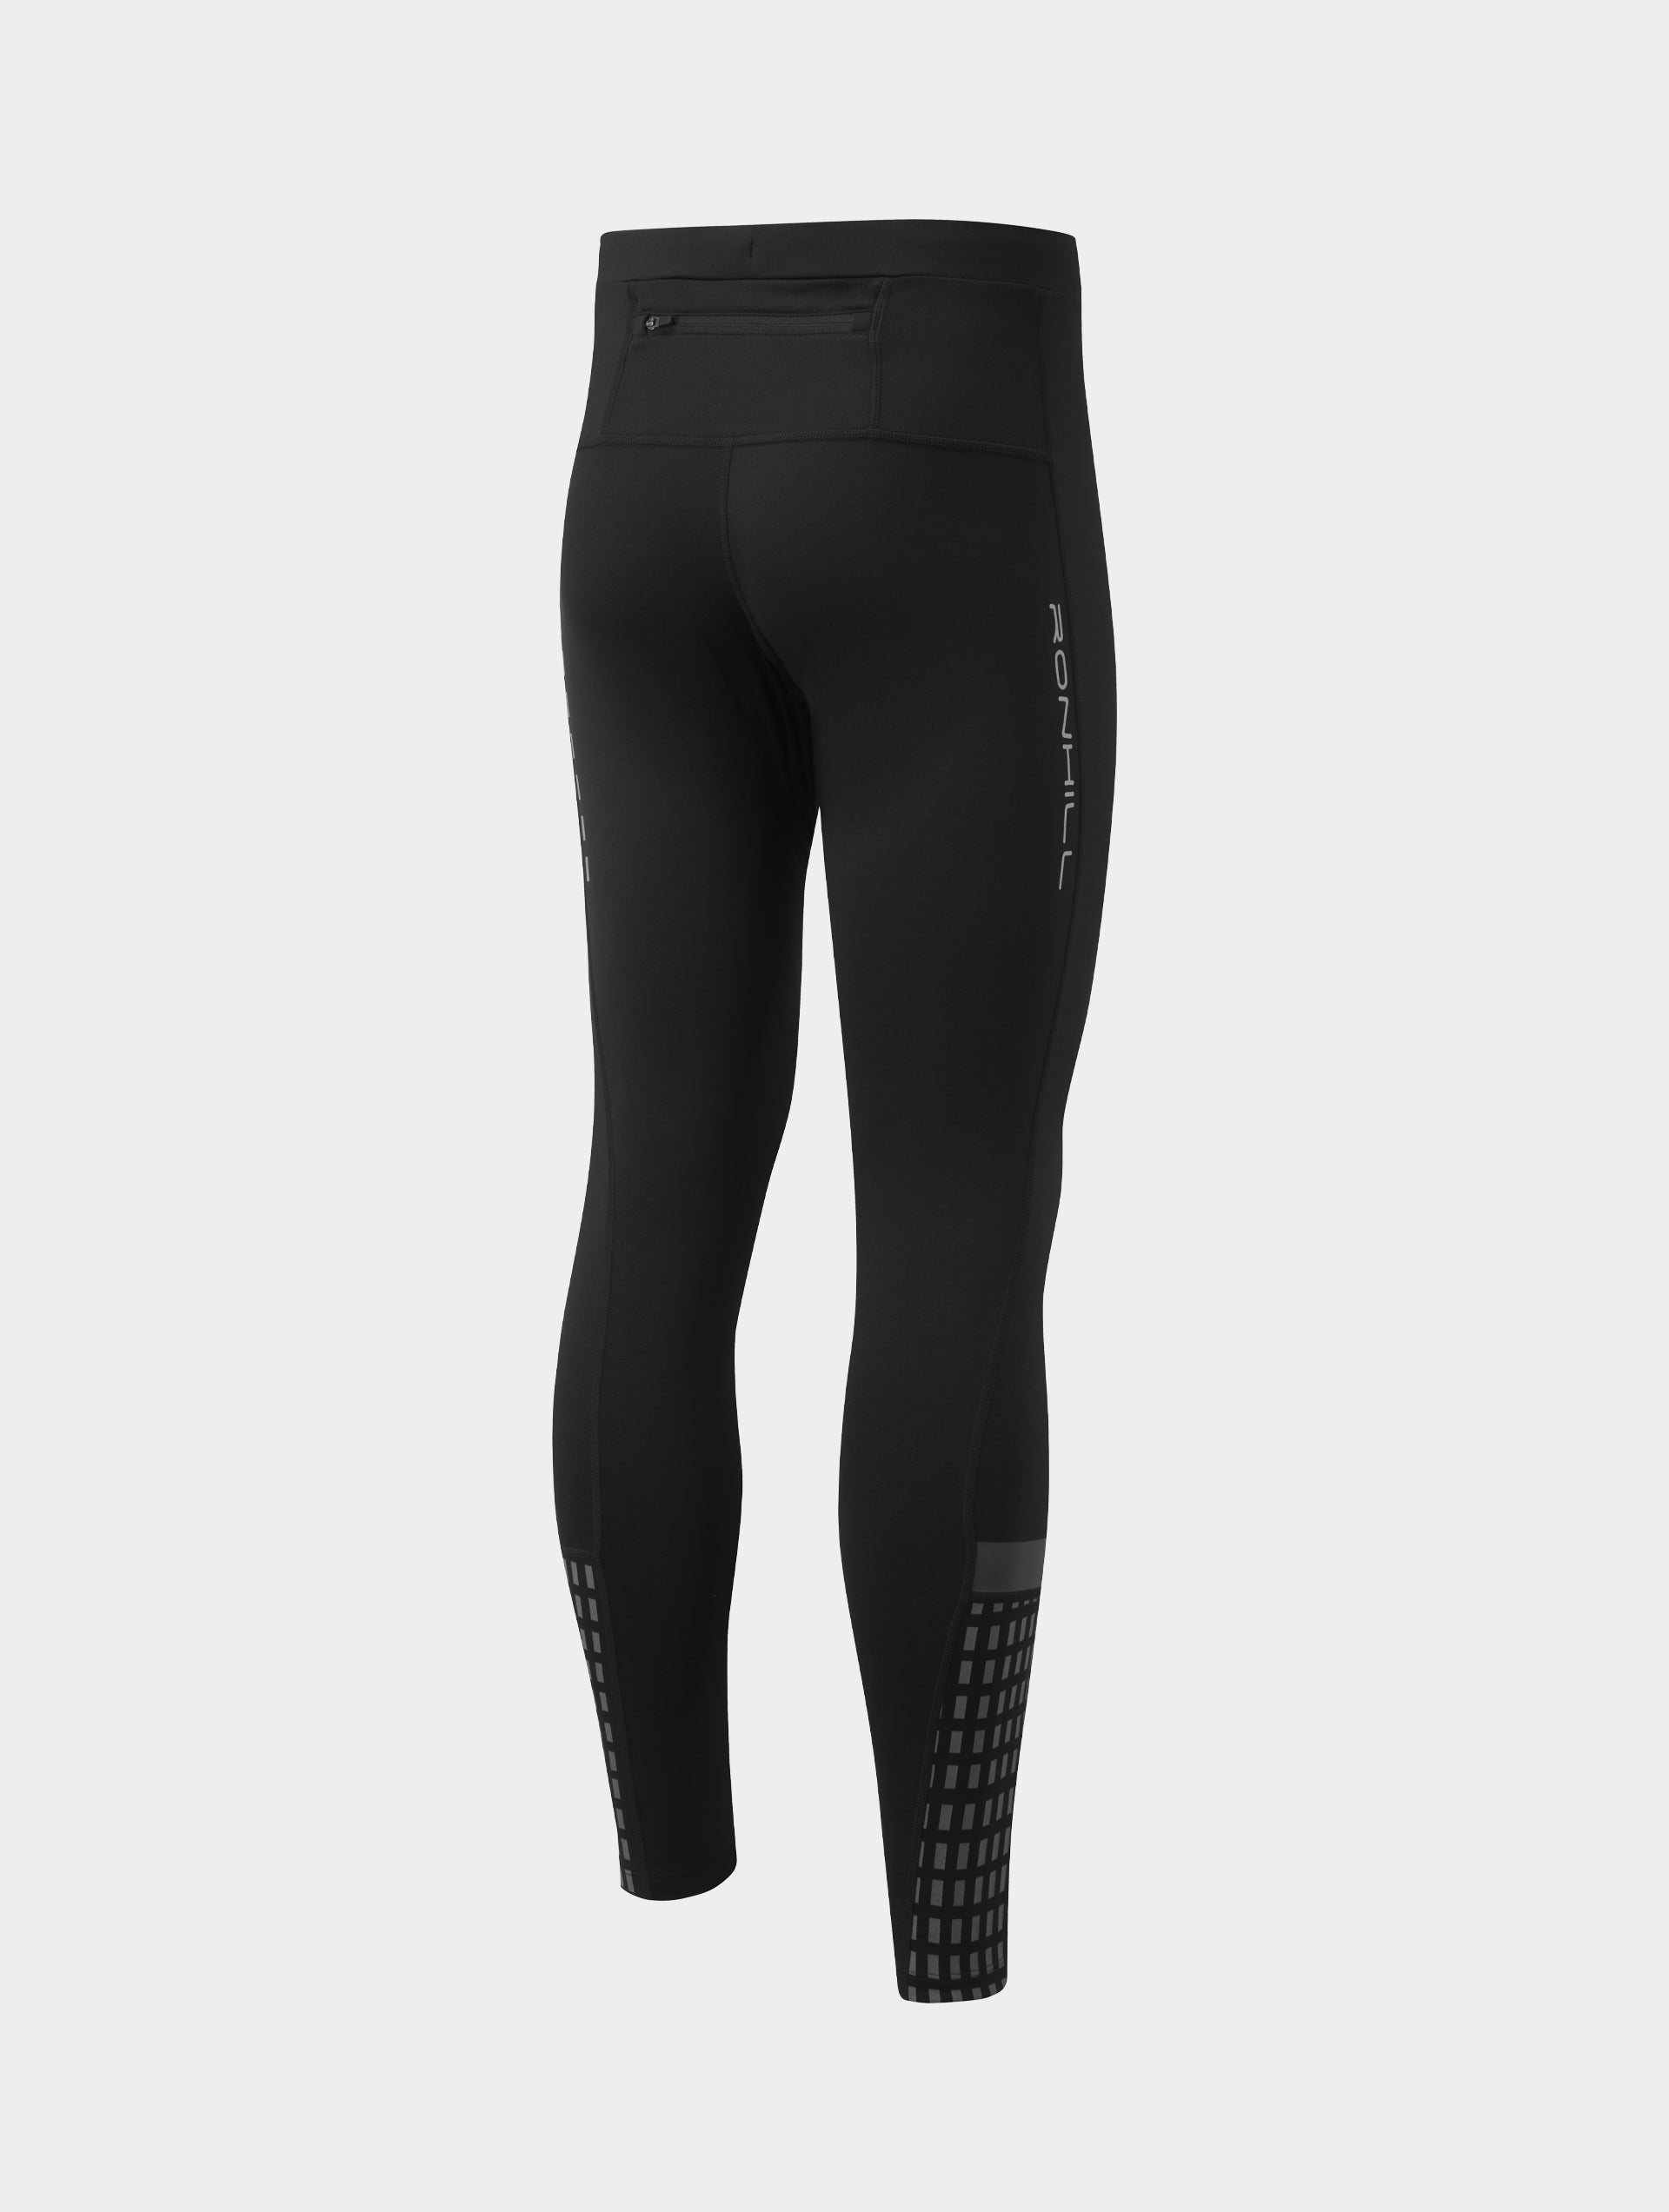 Ronhill Mens Sports leggings & tights SALE • Up to 50% discount